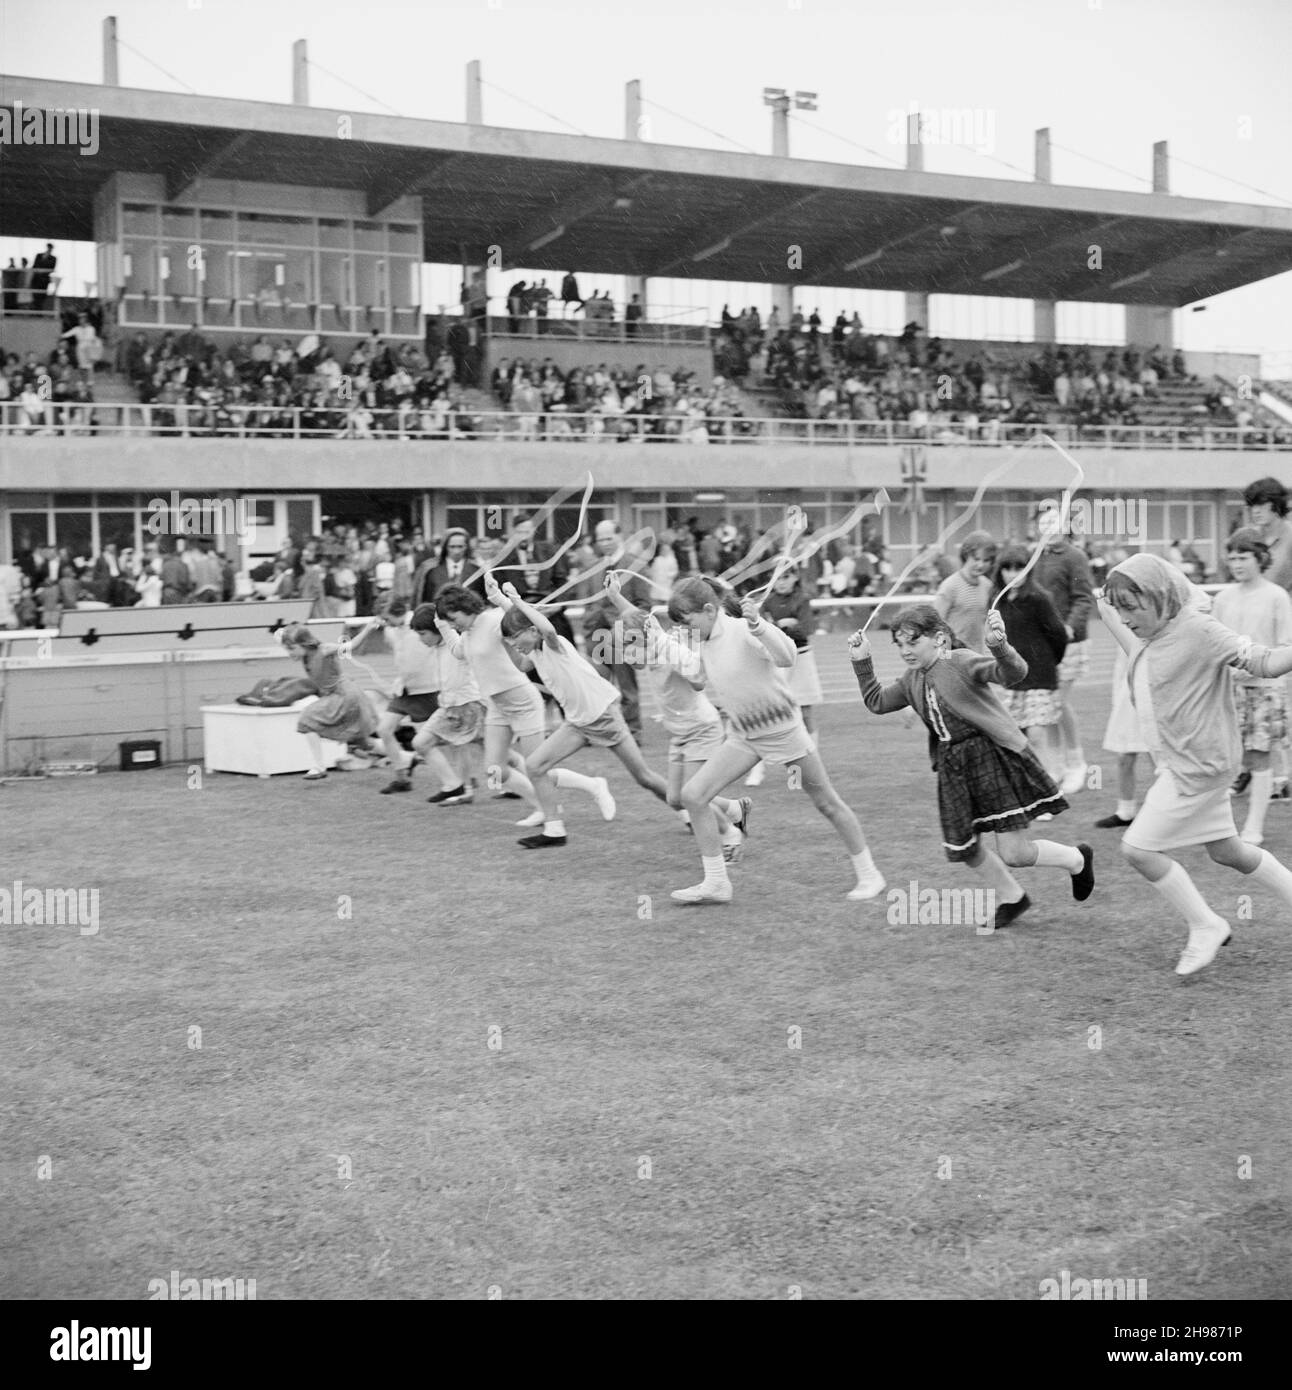 Copthall Stadium, Hendon, Barnet, London, 25/06/1966. Girls leaving the starting line of a skipping race, with spectators in a stand beyond, at the annual Laing Sports Day held at Copthall Stadium. In 1966, the annual Laing employees' Sports Day was held on 25th June at Copthall Stadium in Hendon. It was the first time the event had been held there, having previously taken place the Laing Sports Ground at Elstree. A range of events included athletics and a football competition, and competitors travelled from the firm's regional offices and sites, including from Scotland and Carlisle. There was Stock Photo